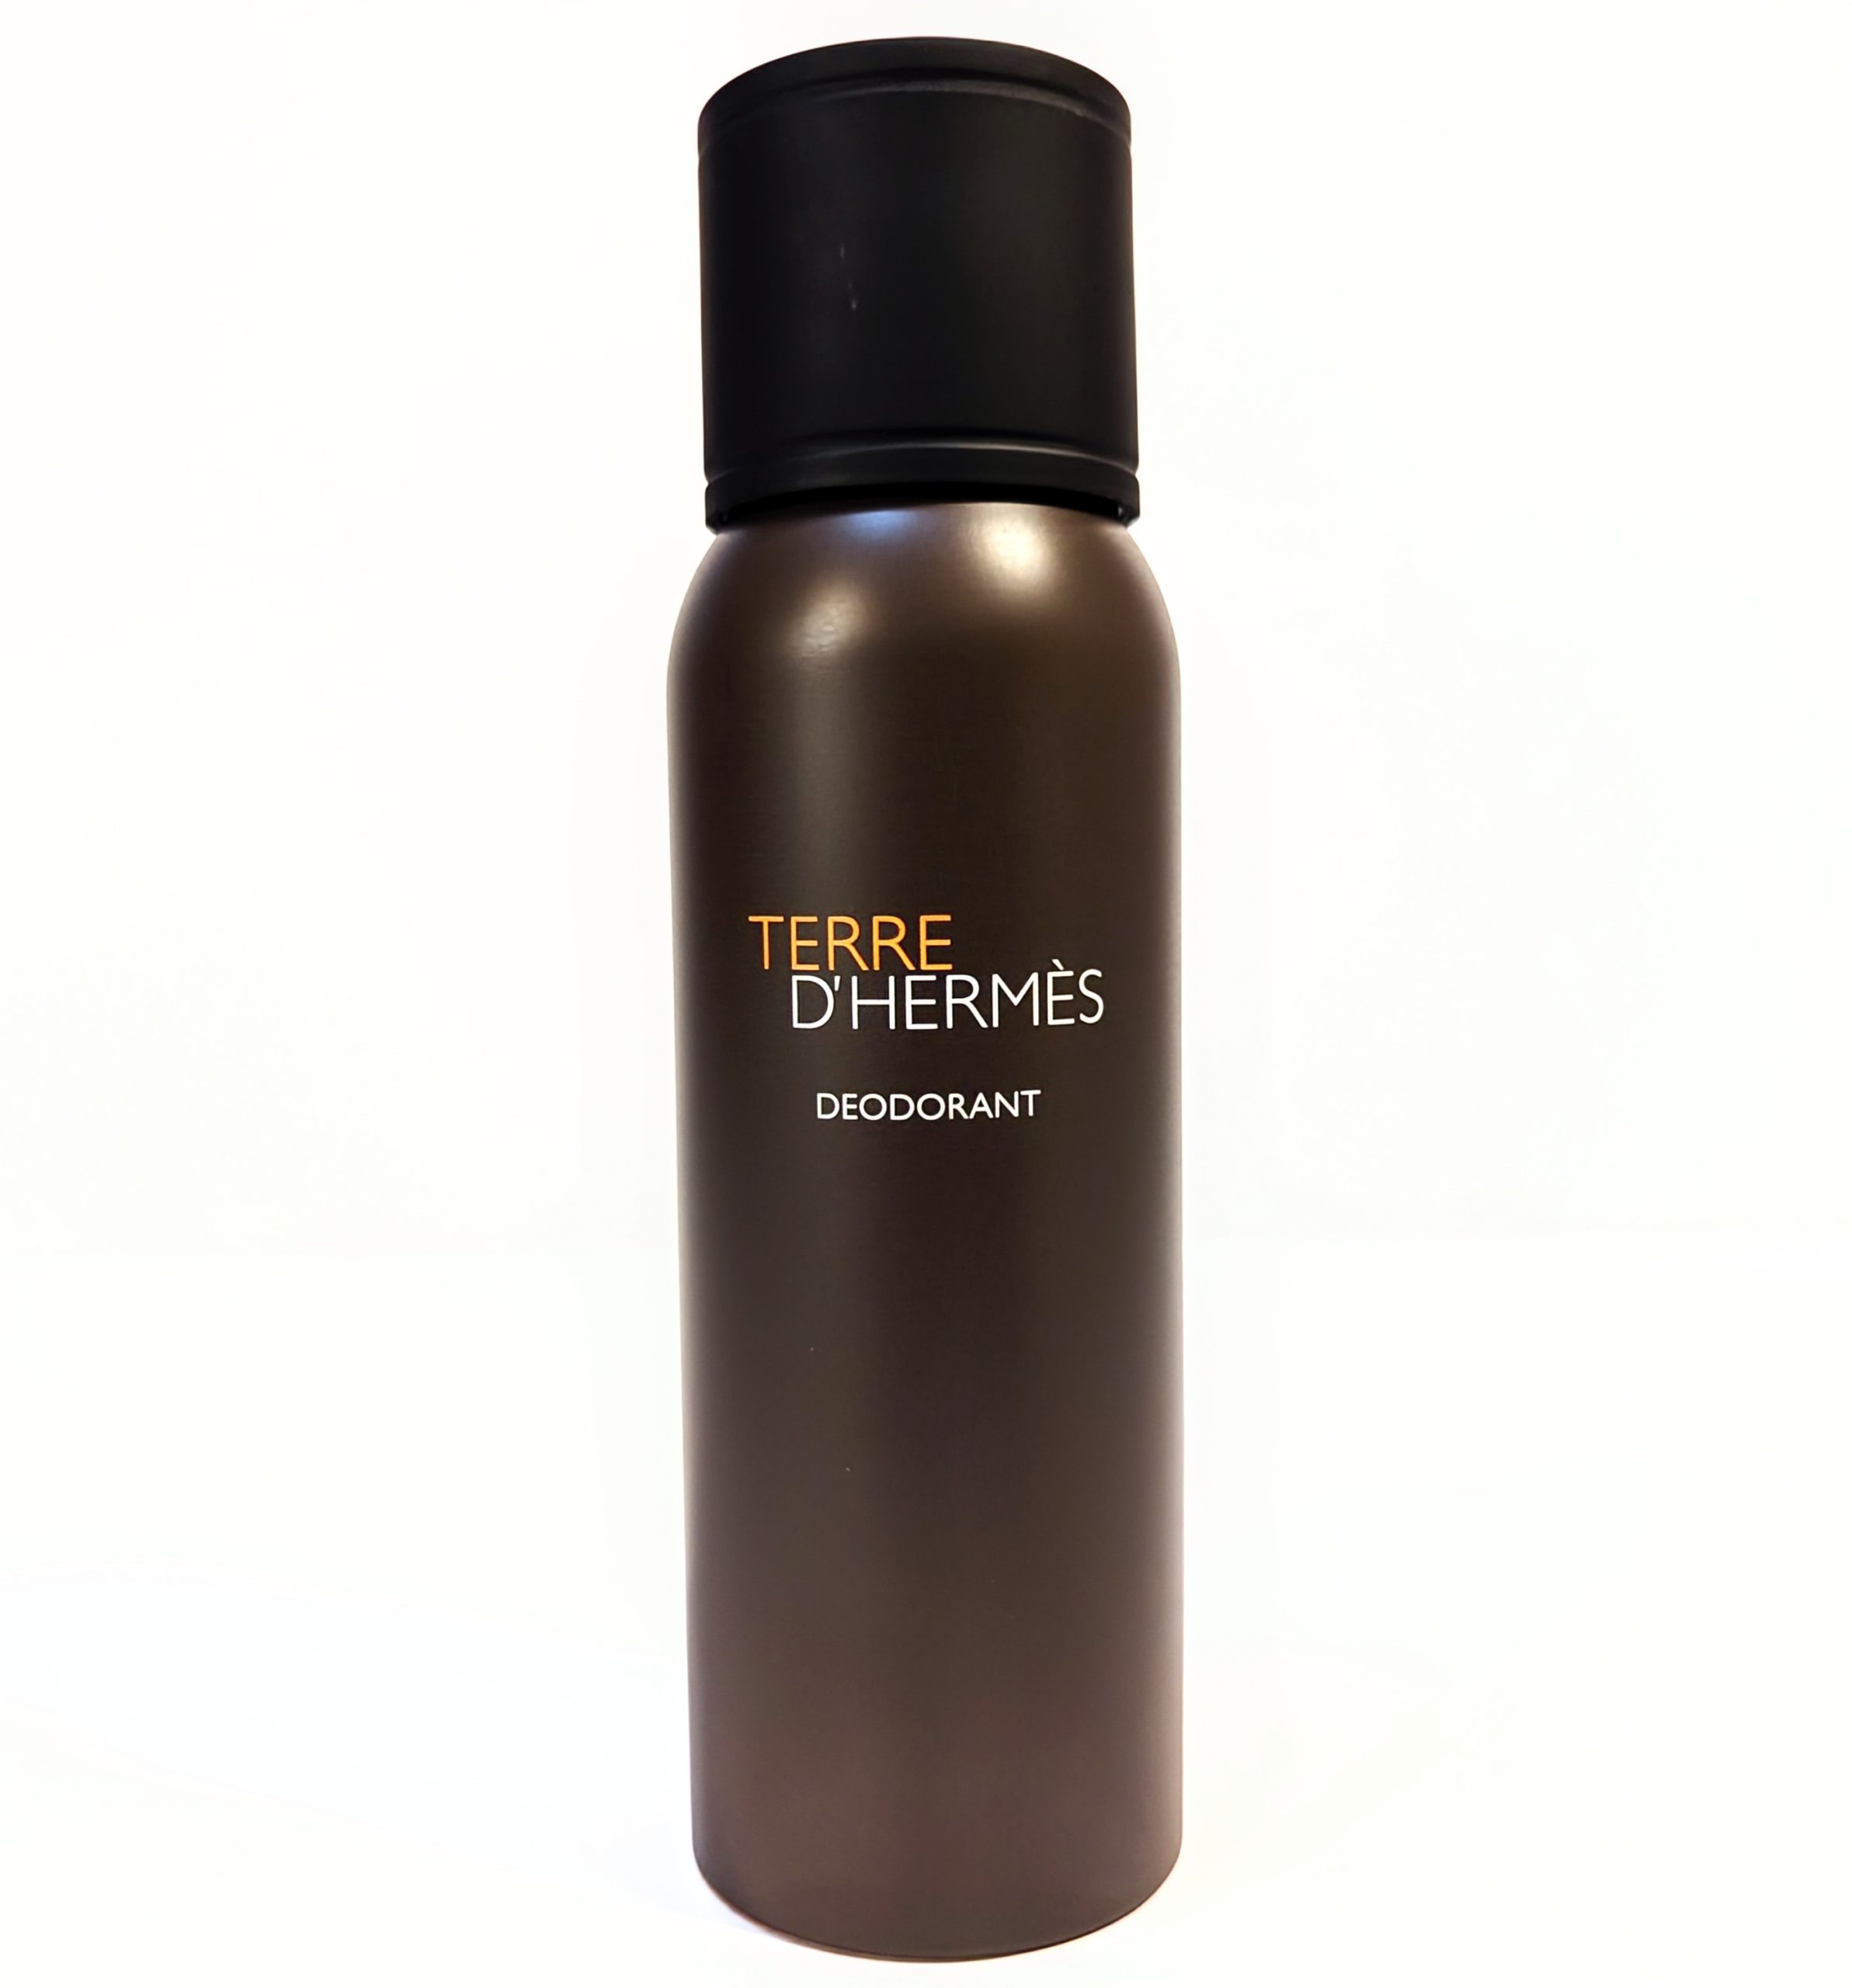 A cylindrical, bronze-colored can of Terre d’Hermès deodorant with a black cap. The text on the can reads, “TERRE D’HERMÈS DEODORANT.